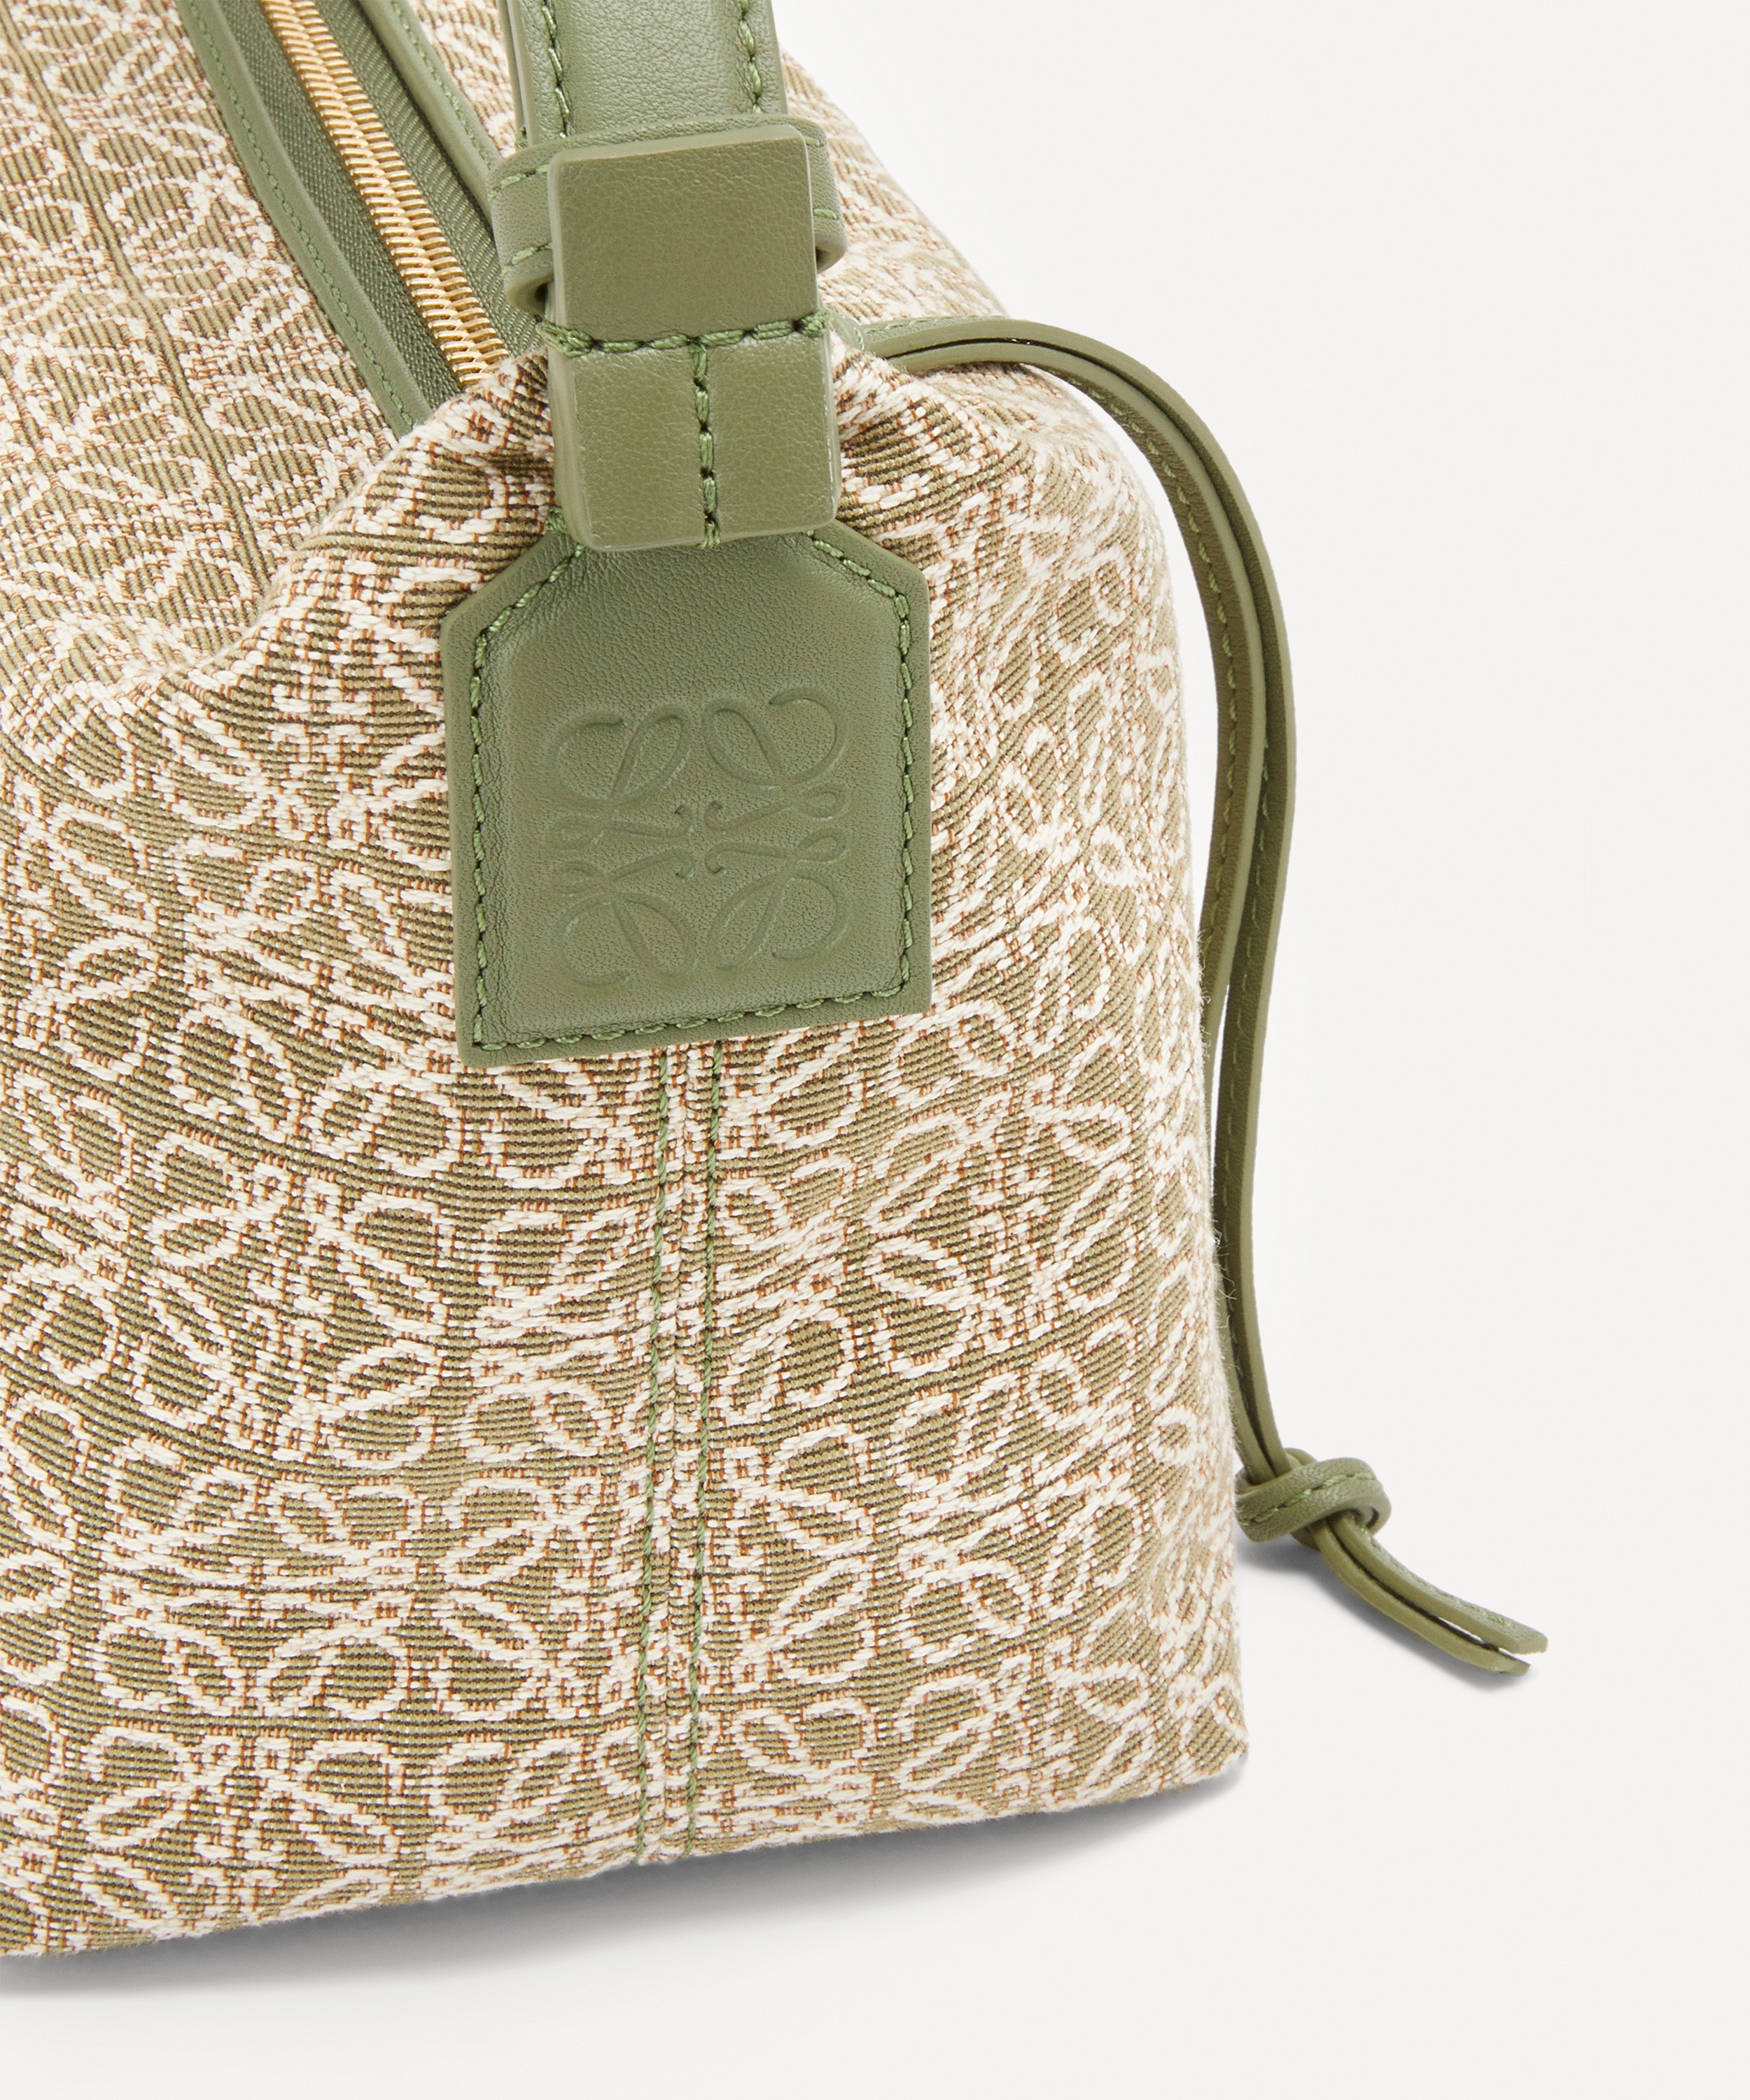 LOEWE launches the new Anagram Jacquard handbag collection